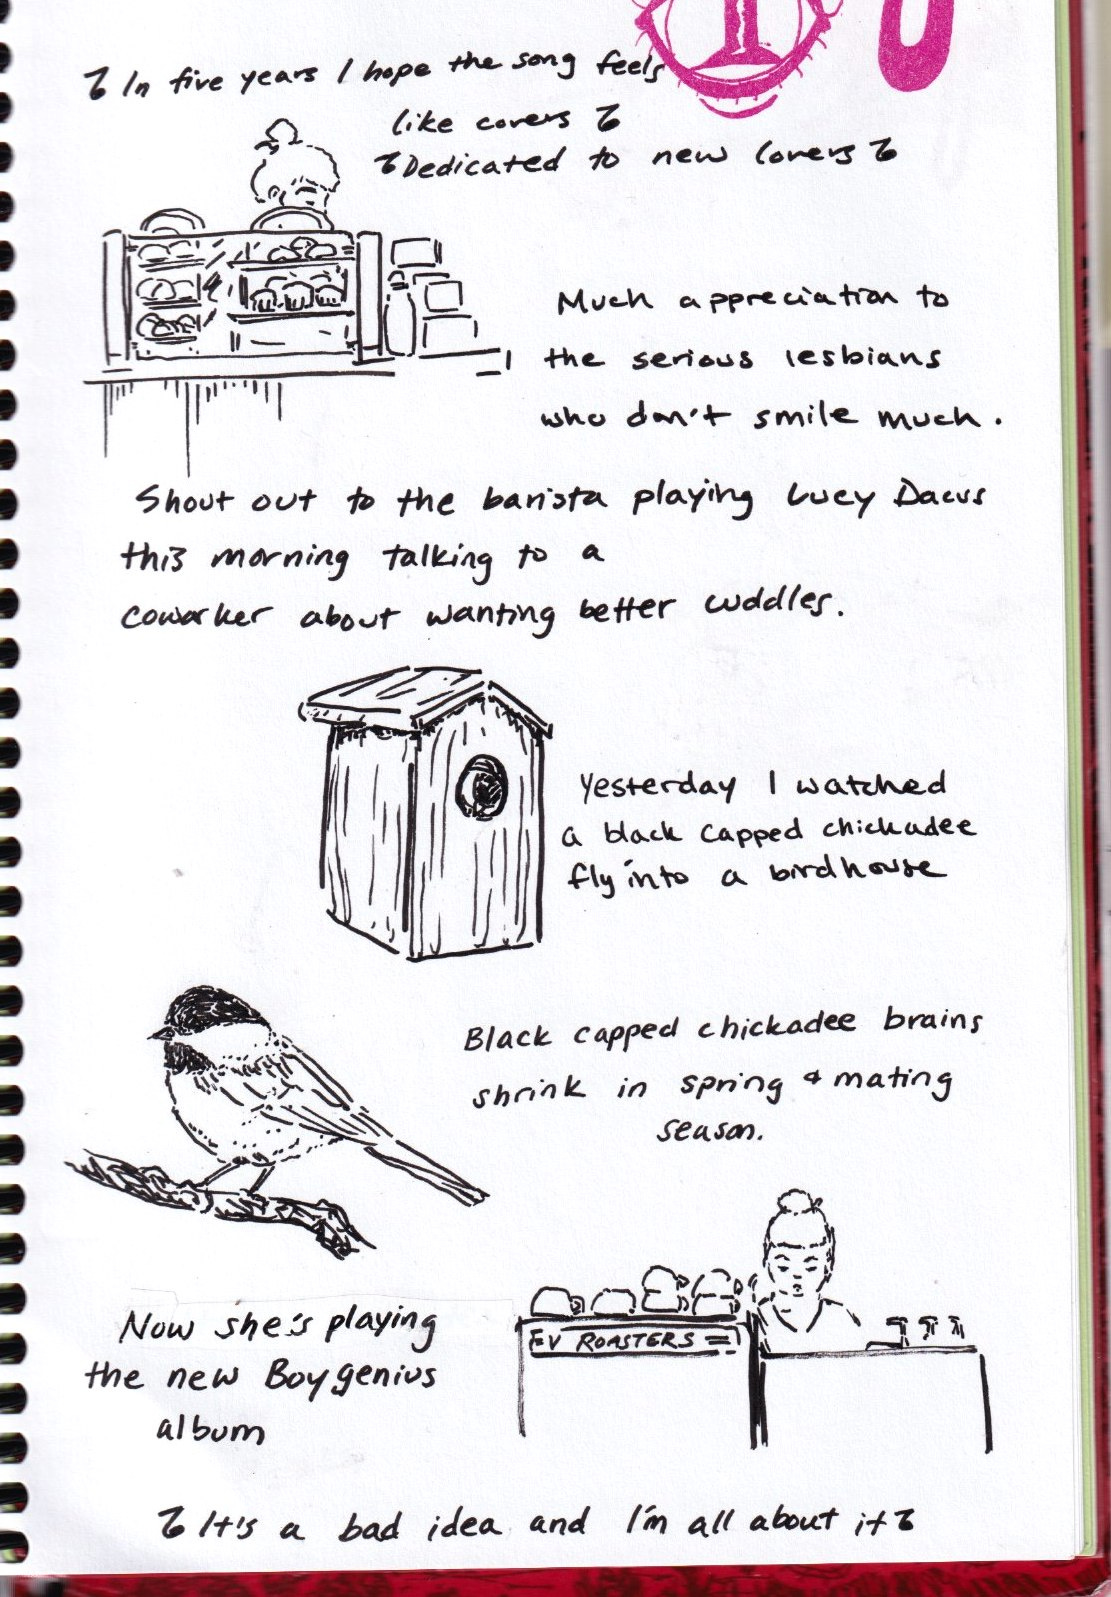 Black and white ink drawing done on white paper in my planner. Gutterless, borderless free flowing comic. The first image is of the top of a barista’s head peaking over a shelf of pastries at a coffee shop. Lyrics read above: In five years I hope the song feels like covers/dedicated to new lovers. My own caption reads: Much appreciation to serious lesbians who don’t smile much.   Shout out to the barista playing Lucy Dacus this morning talking to a coworker about wanting better cuddles.   A second image of a bird’s head peaking out of a wooden birdhouse. Text reads: yesterday I watched a black caped chickadee fly into a birdhouse.   A third image below: a drawing of a black capped chickadee standing. Text reads: Black capped chickadee brains shrink in spring and mating season.   The last image is of the barista again, behind the counter and espresso machine. Mugs are stacked in front of her. She looks serious and uninterested. Text reads: Now she’s playing the new Boygenius album. Lyrics are at the bottom: It’s a bad idea and I’m all about it. 